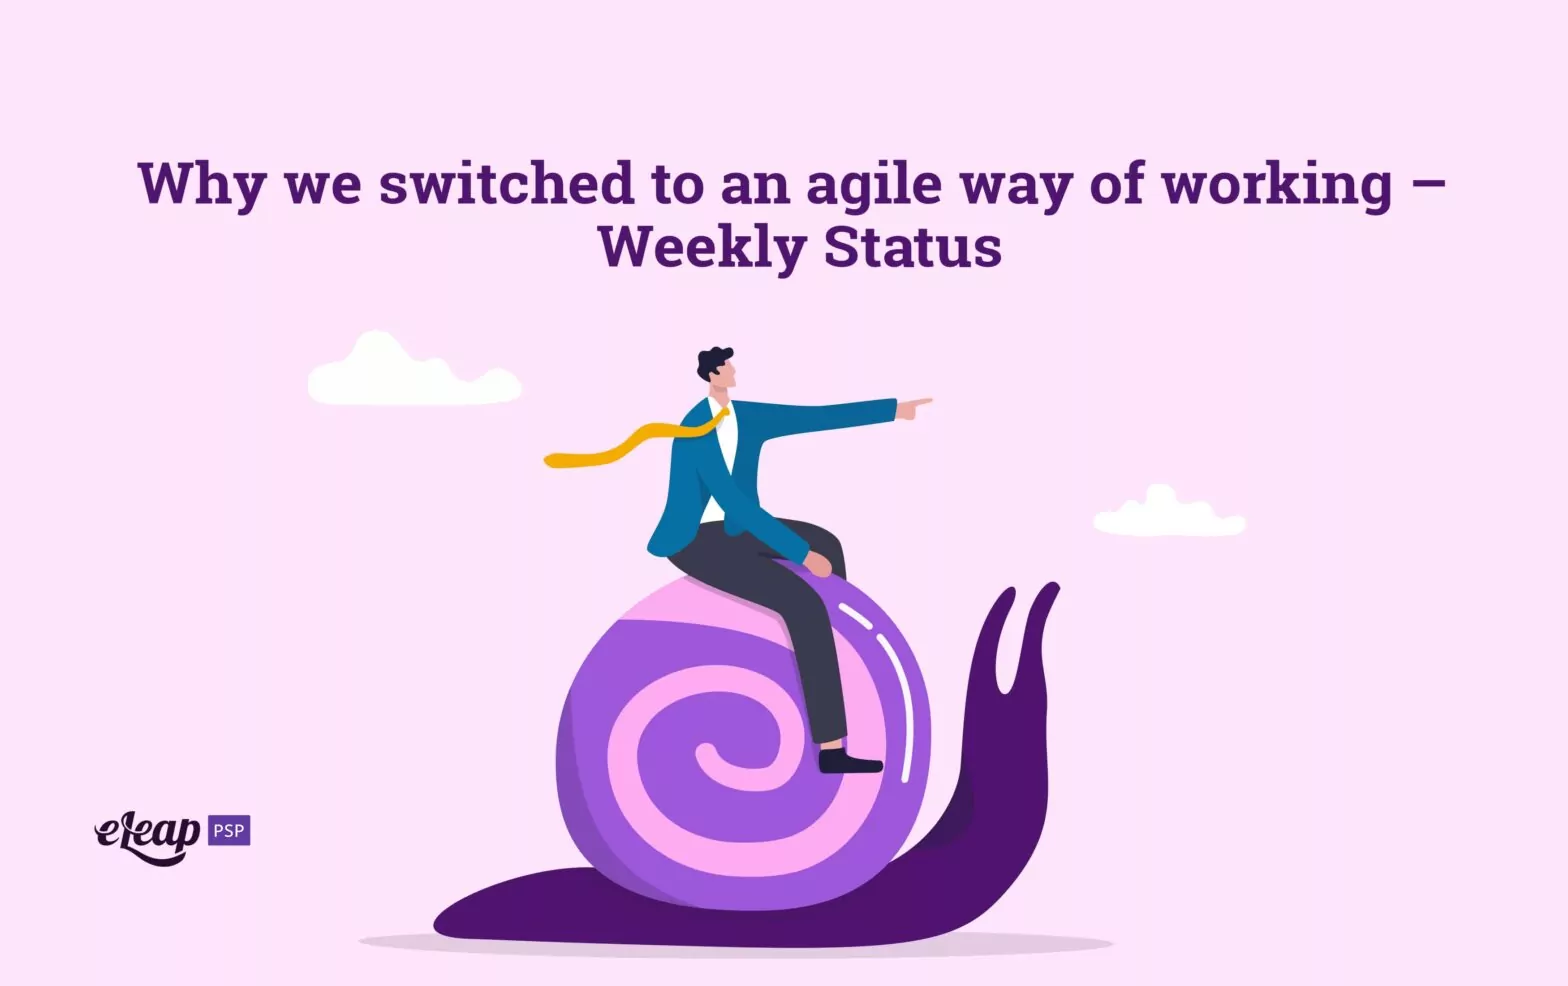 Why We Switched to an Agile Way of Working – Weekly Status